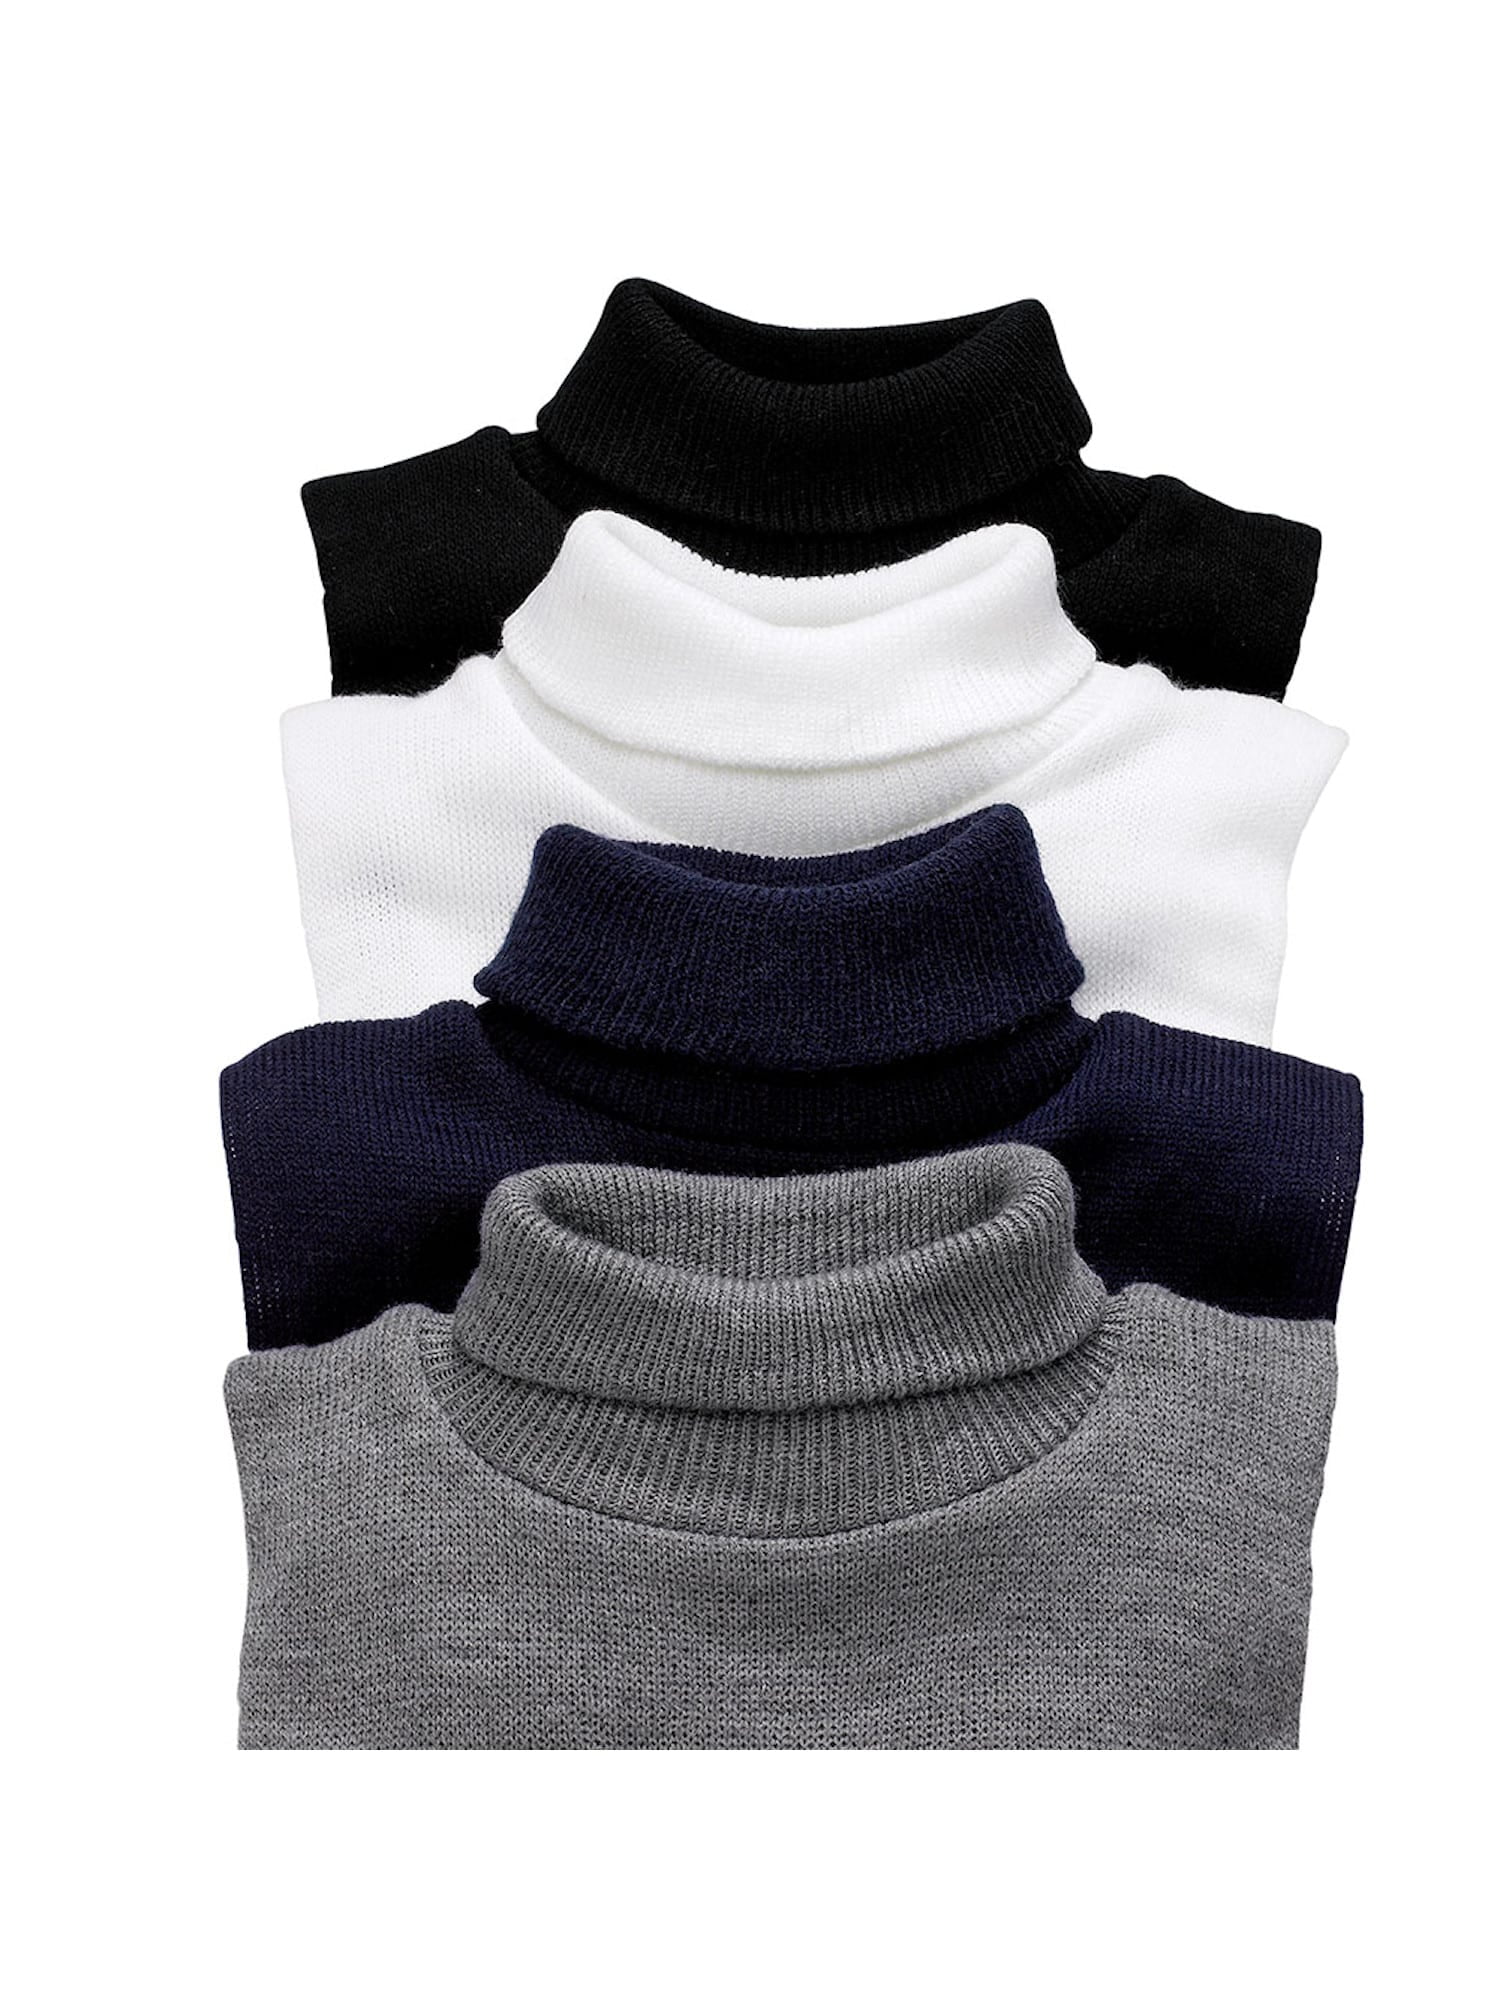 TURTLE NECK DICKIES 3-PACK 100% COTTON MADE IN USA DIRECT FROM MFG FREE SHIPPING 